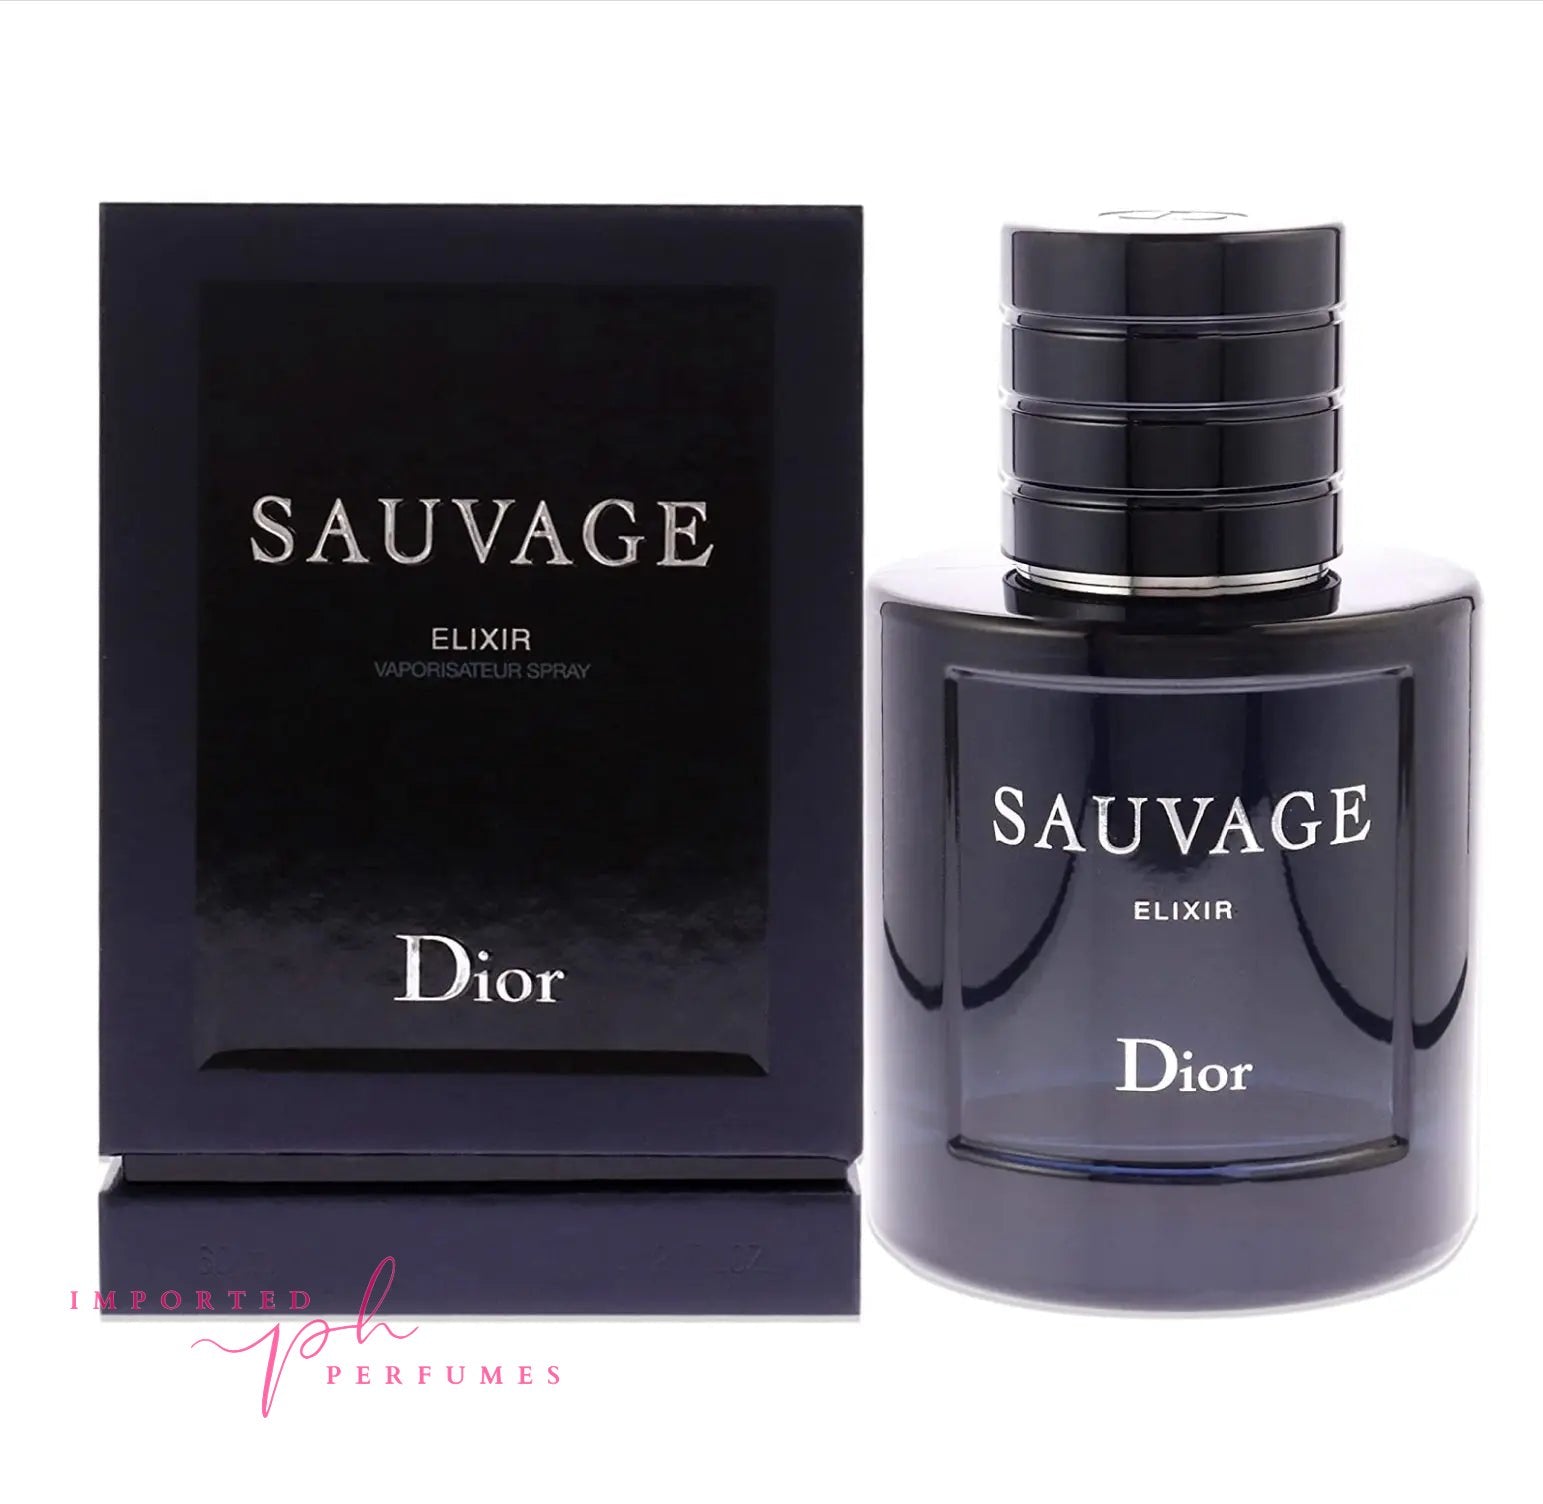 Dior Sauvage Elixir Men EDC For Men 60ml Imported Perfumes & Beauty Store